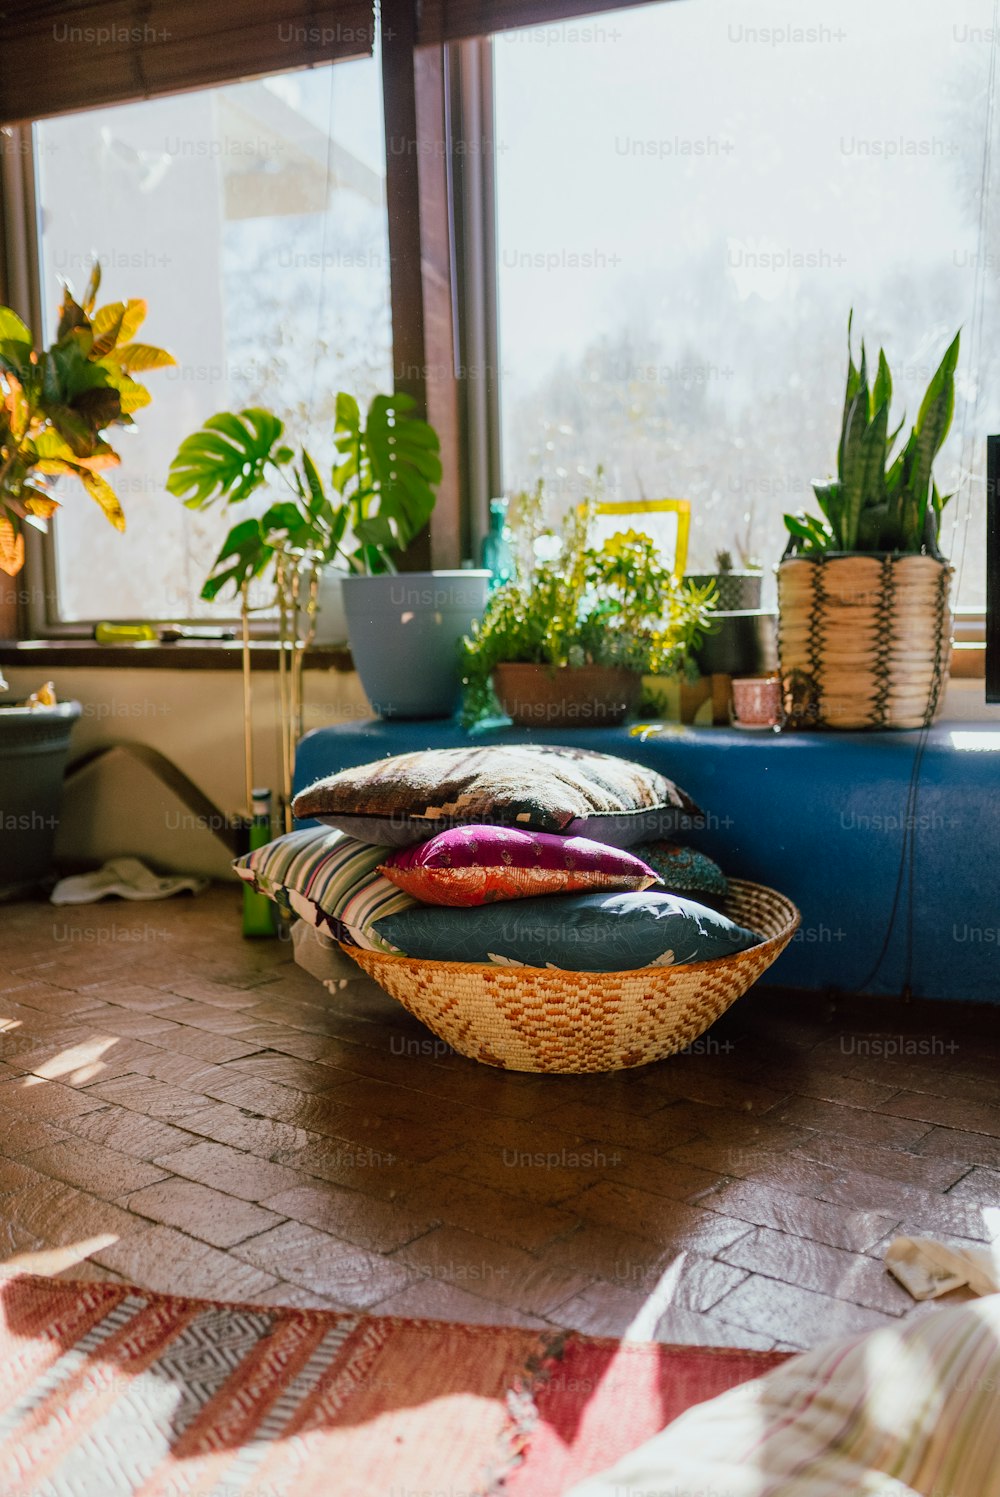 a basket filled with pillows sitting on top of a wooden floor